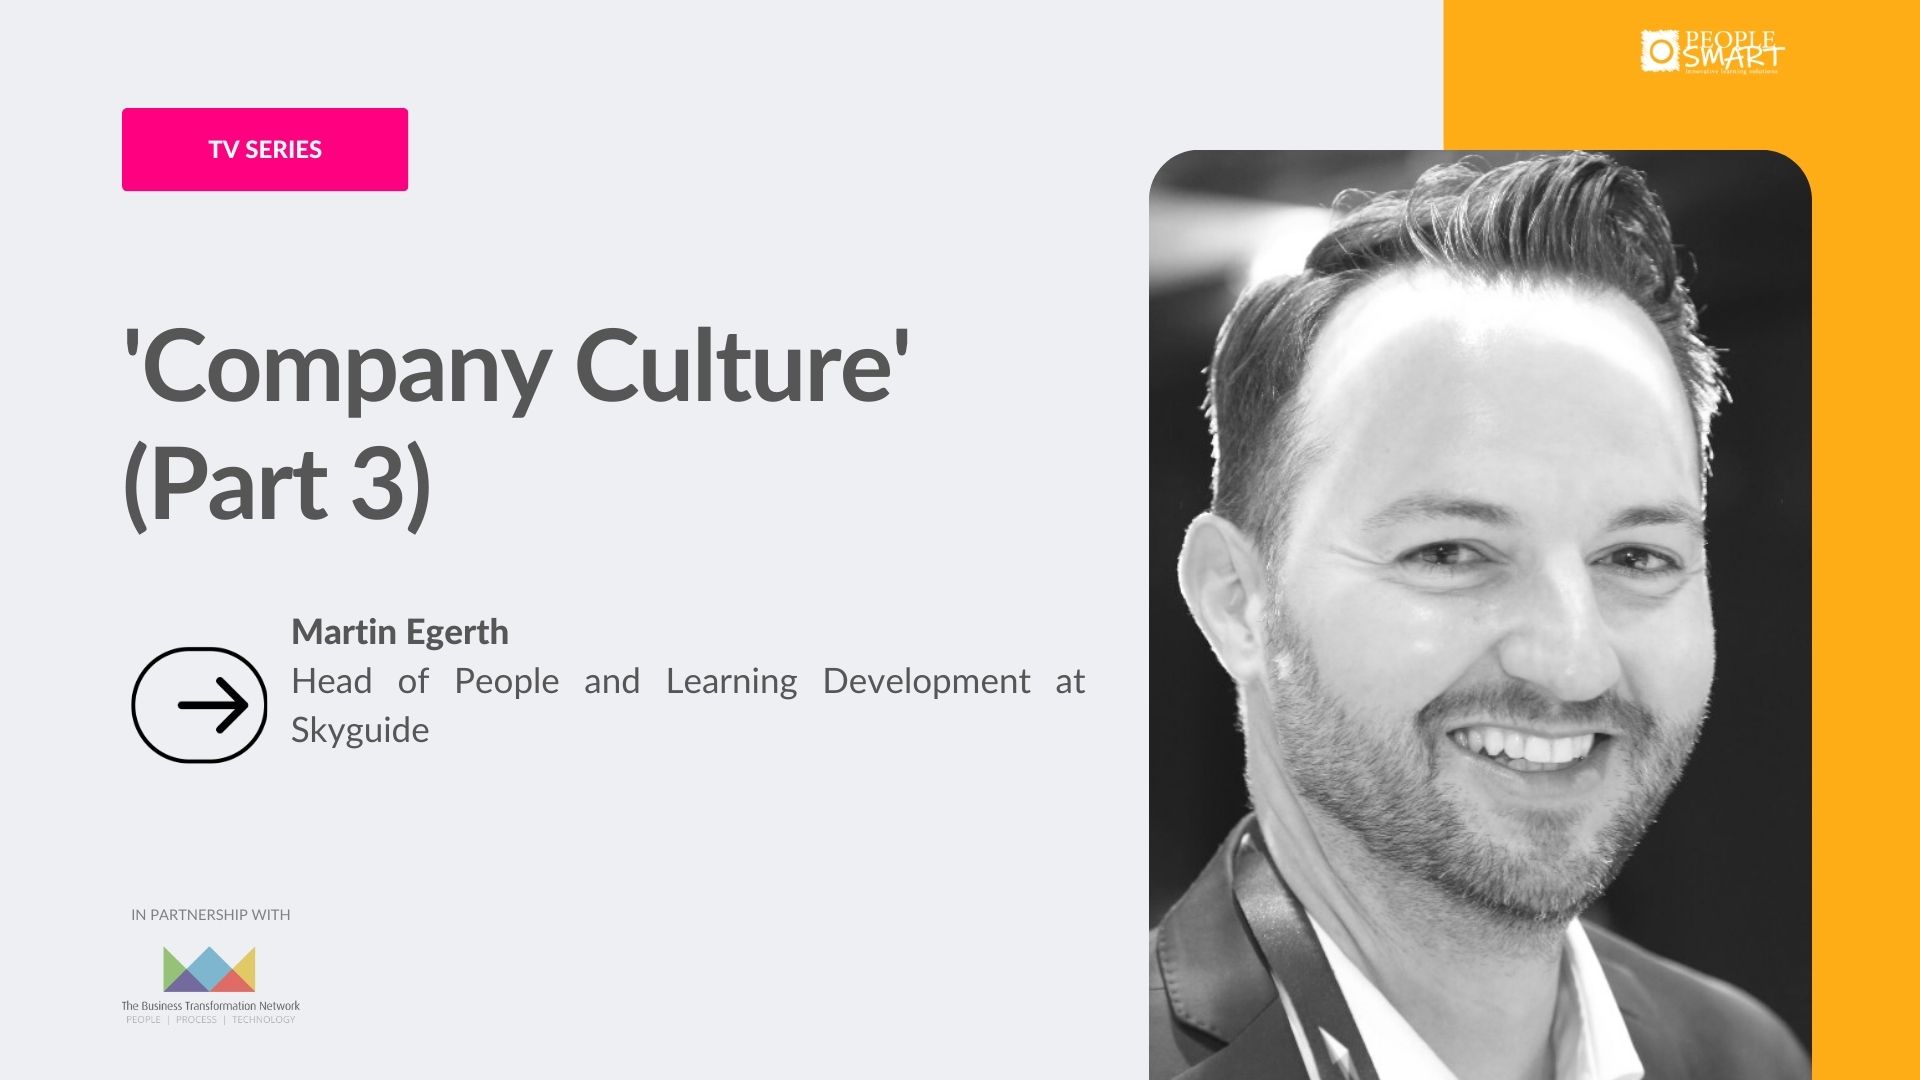 ‘Company Culture’ with Martin Egerth (Part 3)